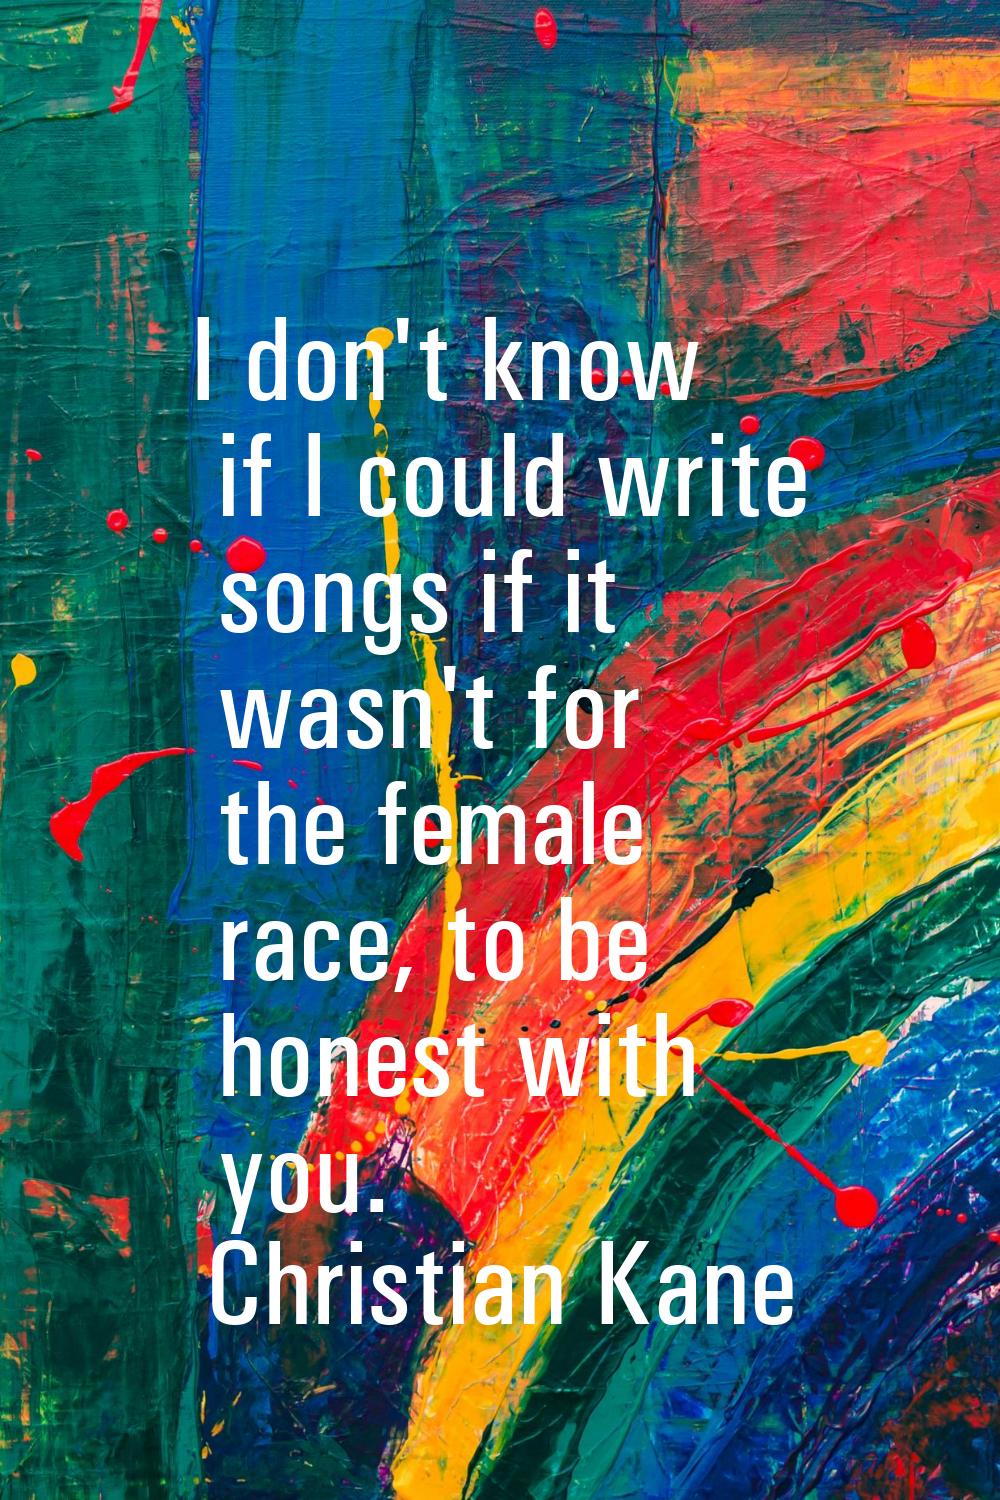 I don't know if I could write songs if it wasn't for the female race, to be honest with you.